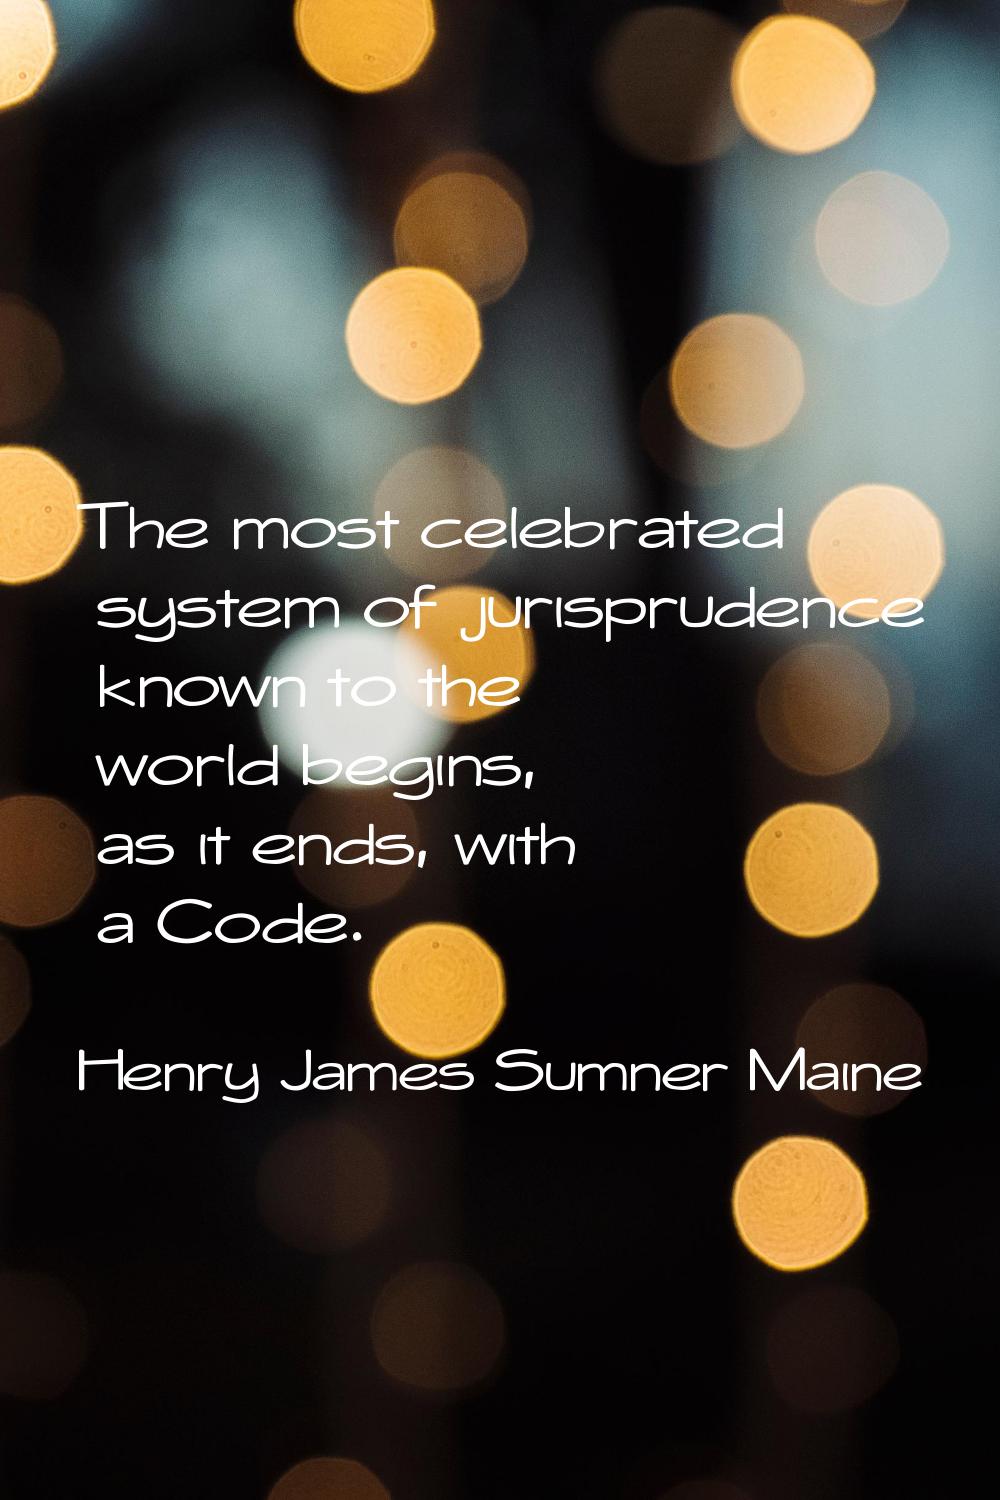 The most celebrated system of jurisprudence known to the world begins, as it ends, with a Code.